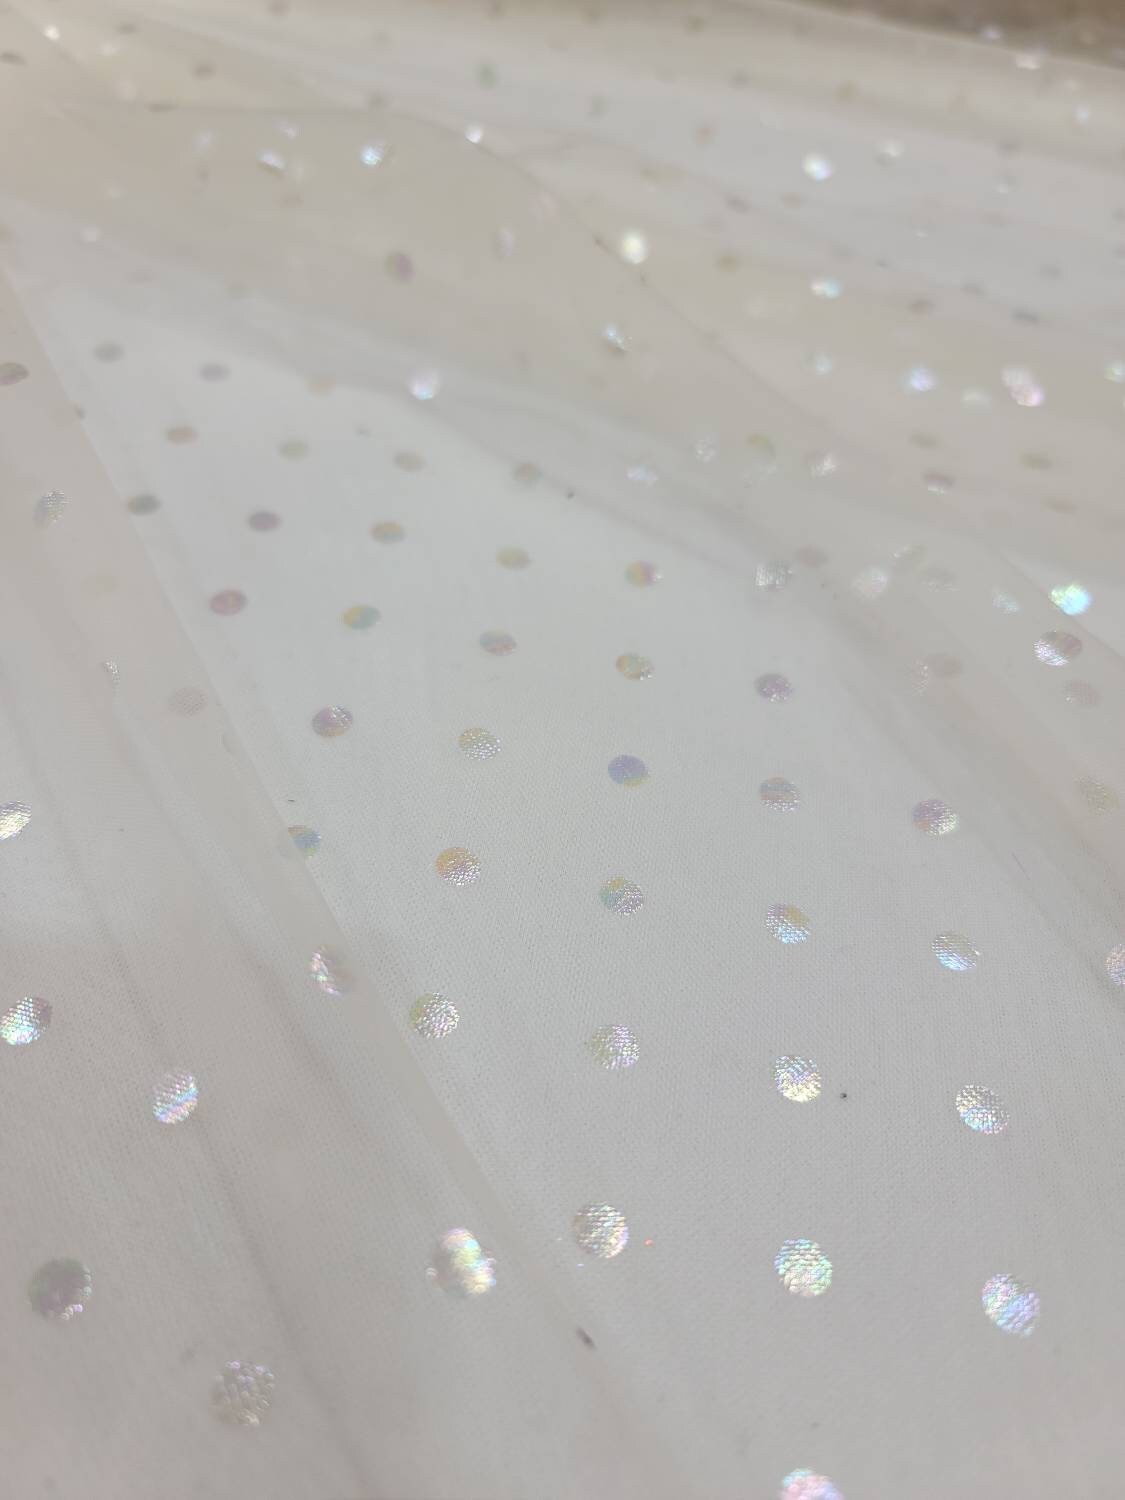 Shiny off White Organza Fabric, Organza Fabric With Shine for